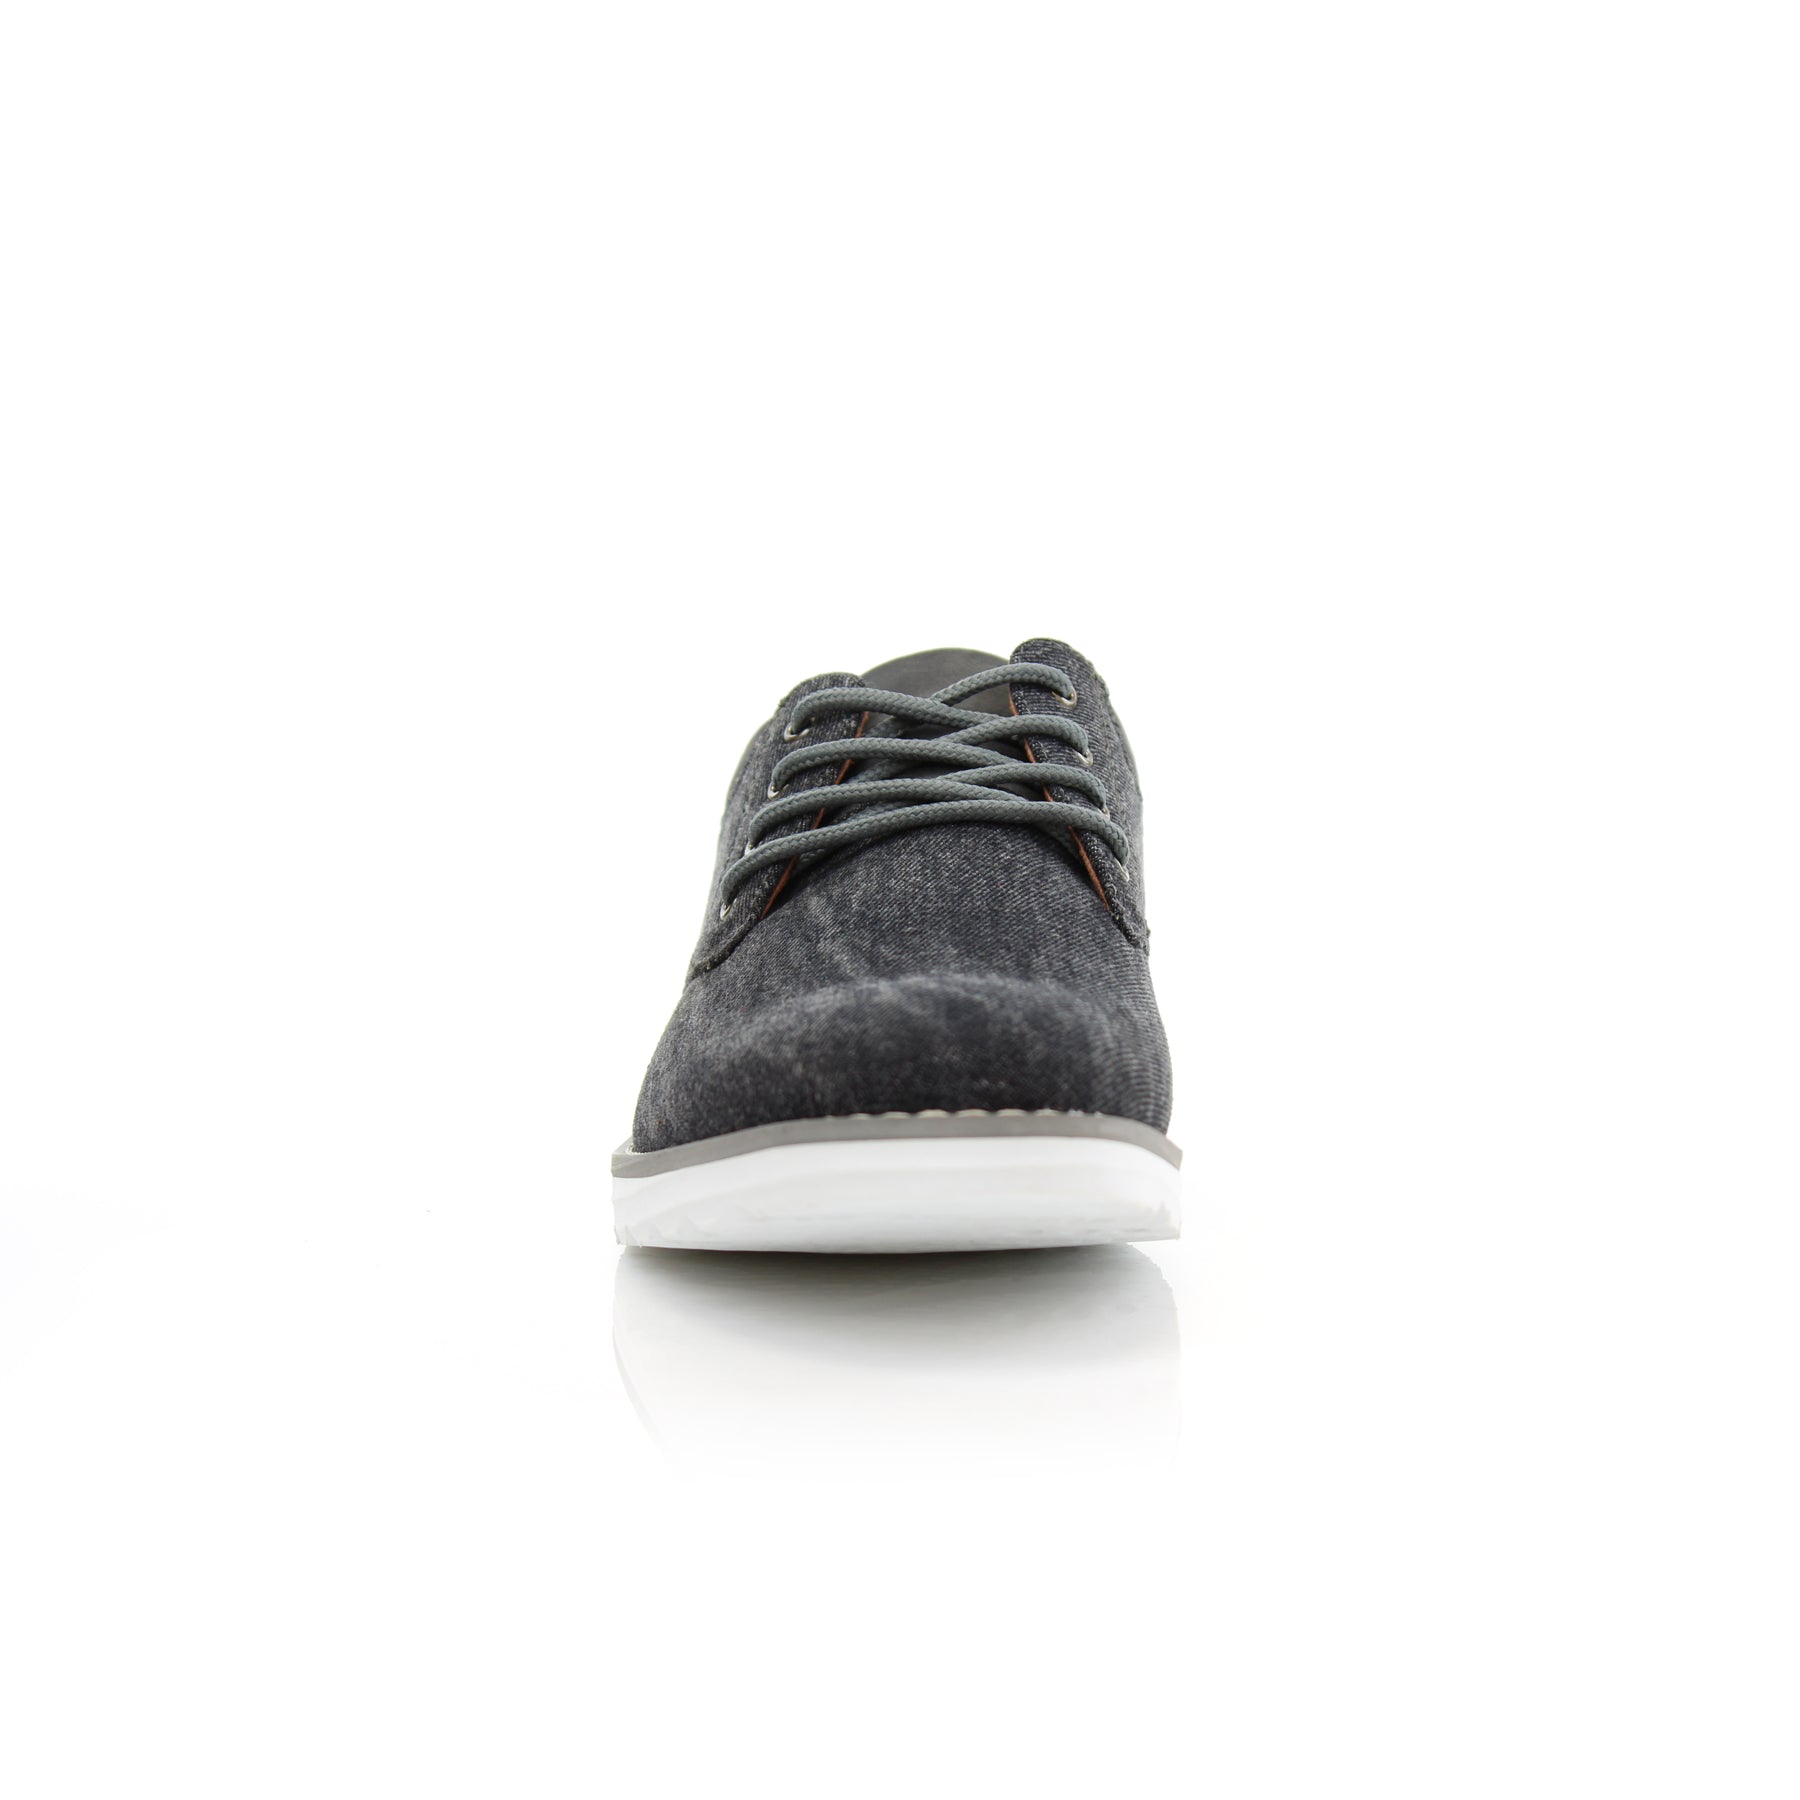 Denim Sneakers | Elton by Polar Fox | Conal Footwear | Front Angle View